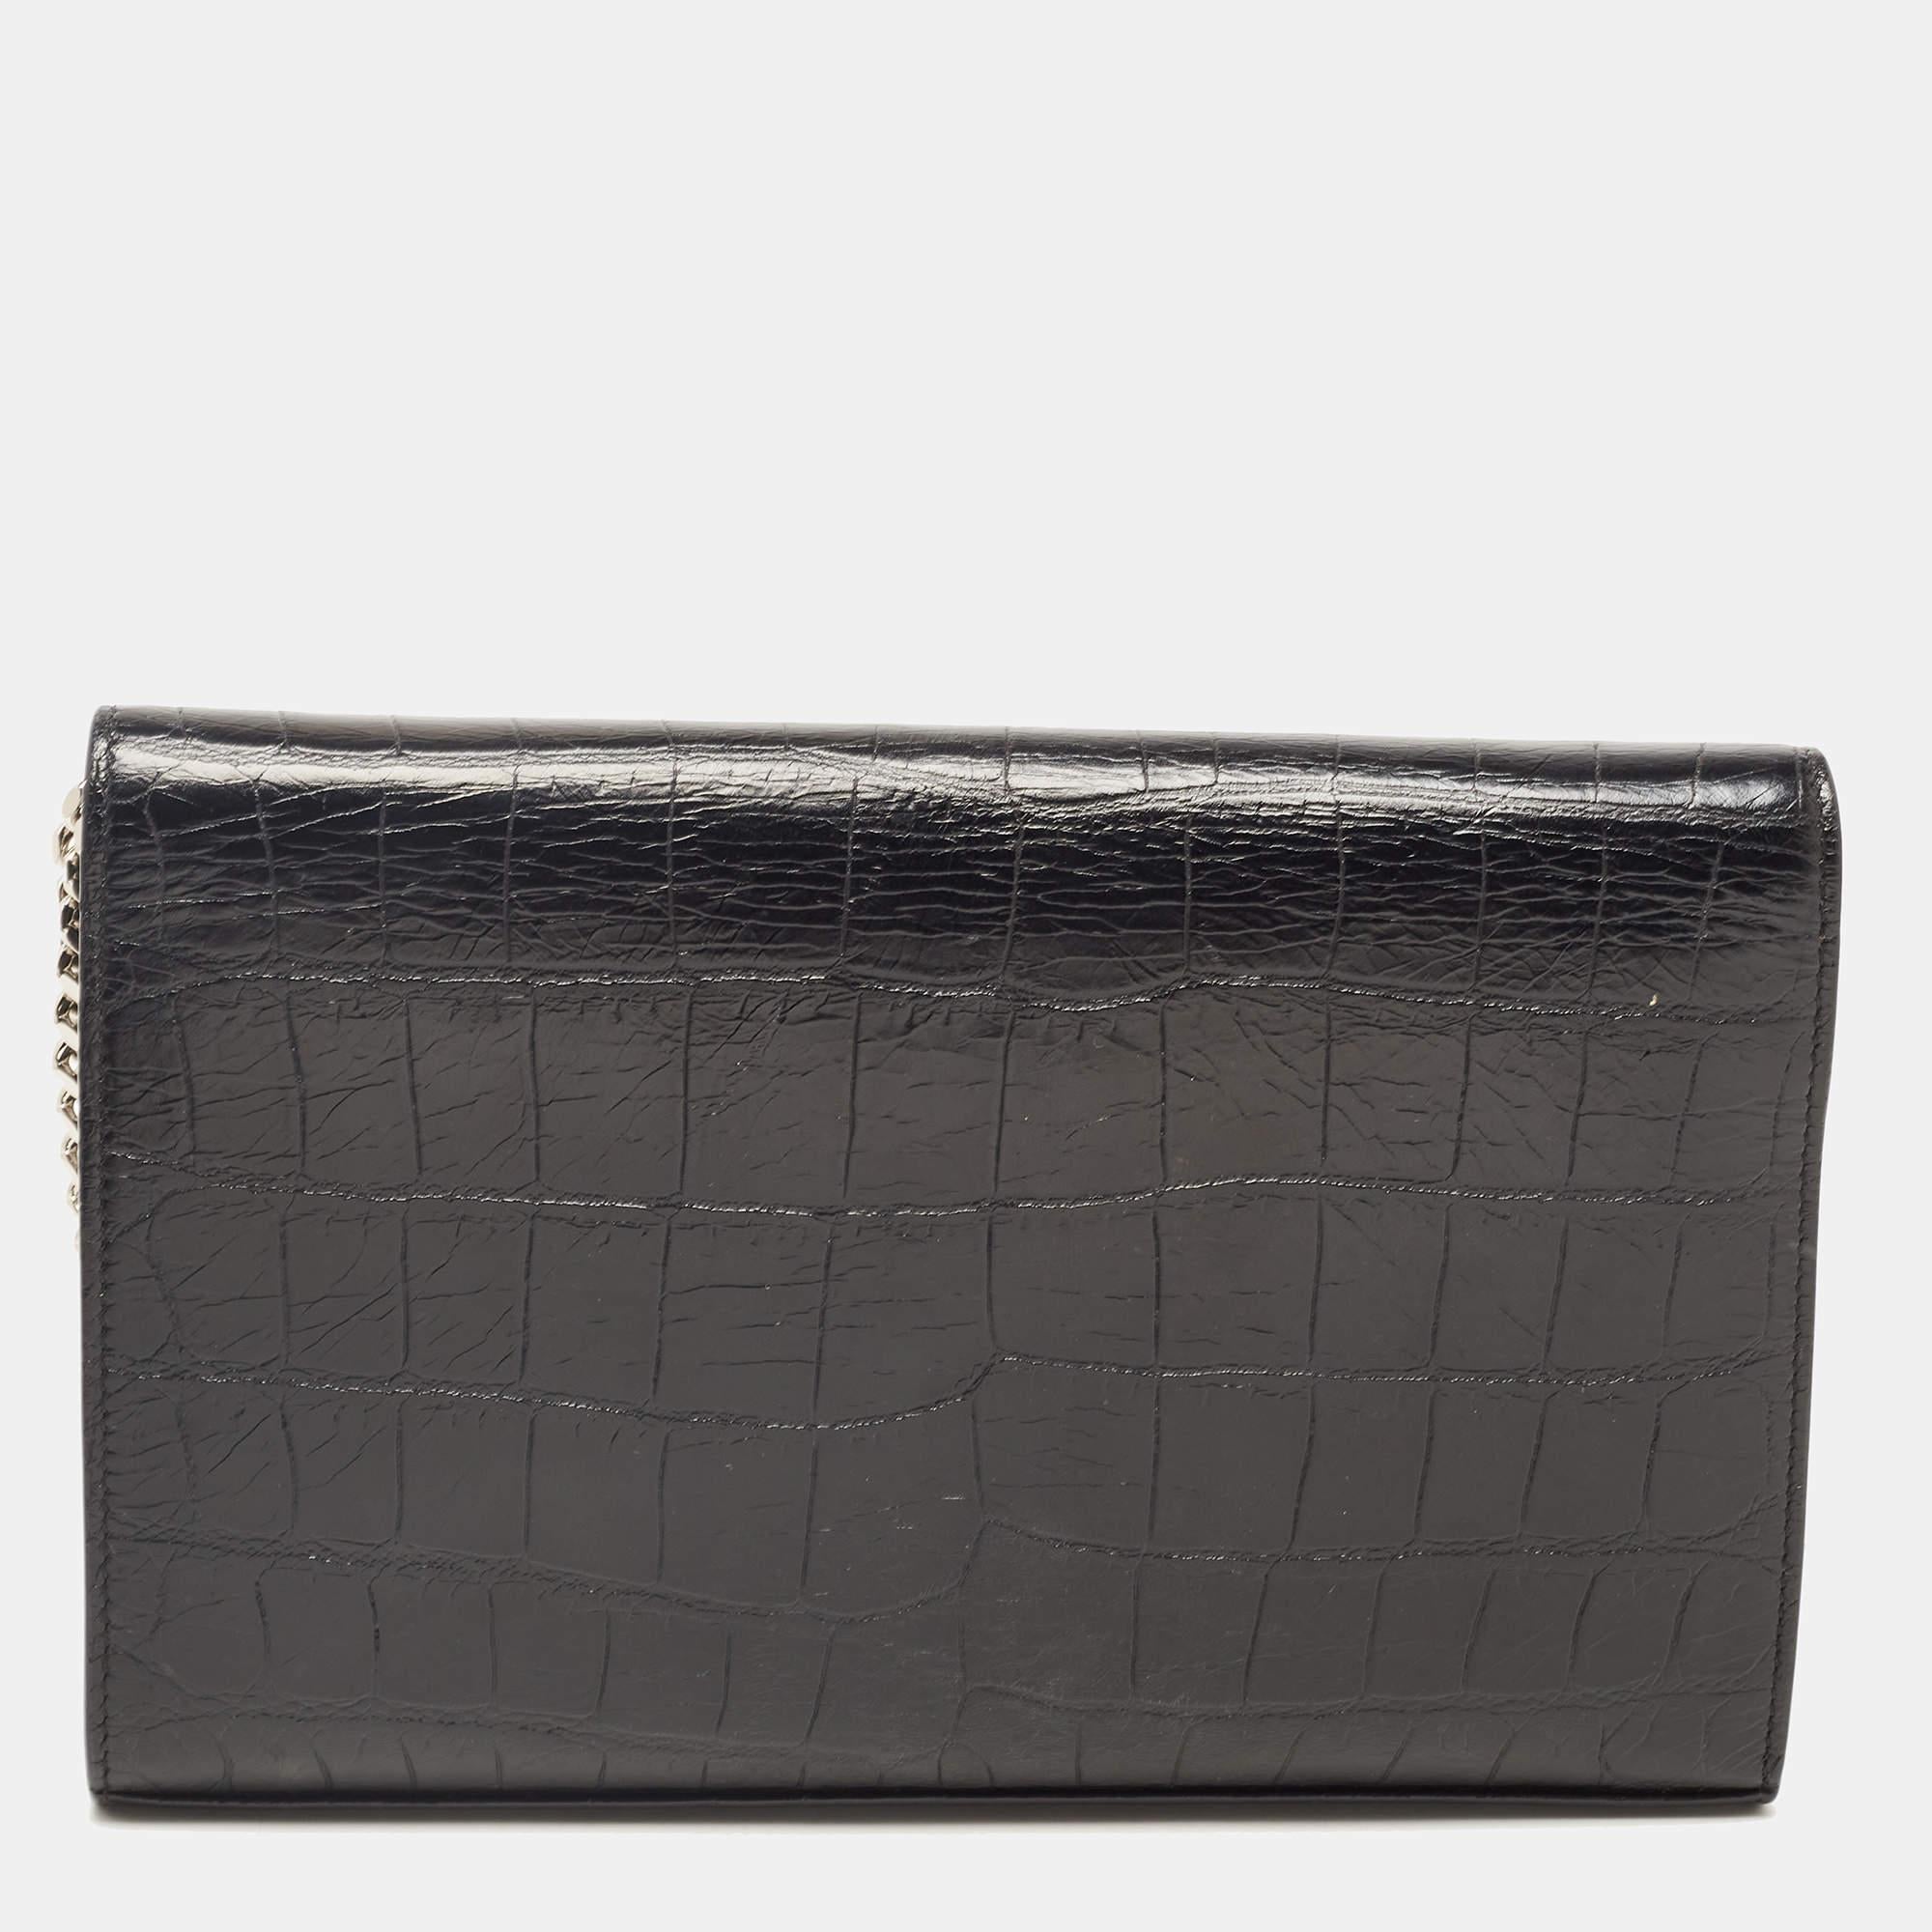 Meticulously crafted from blue croc-embossed leather, this Saint Laurent Kate clutch exudes just the right amount of sophistication! The bag features the YSL logo on the front flap and a fabric and leather-lined compartment to store your essentials.